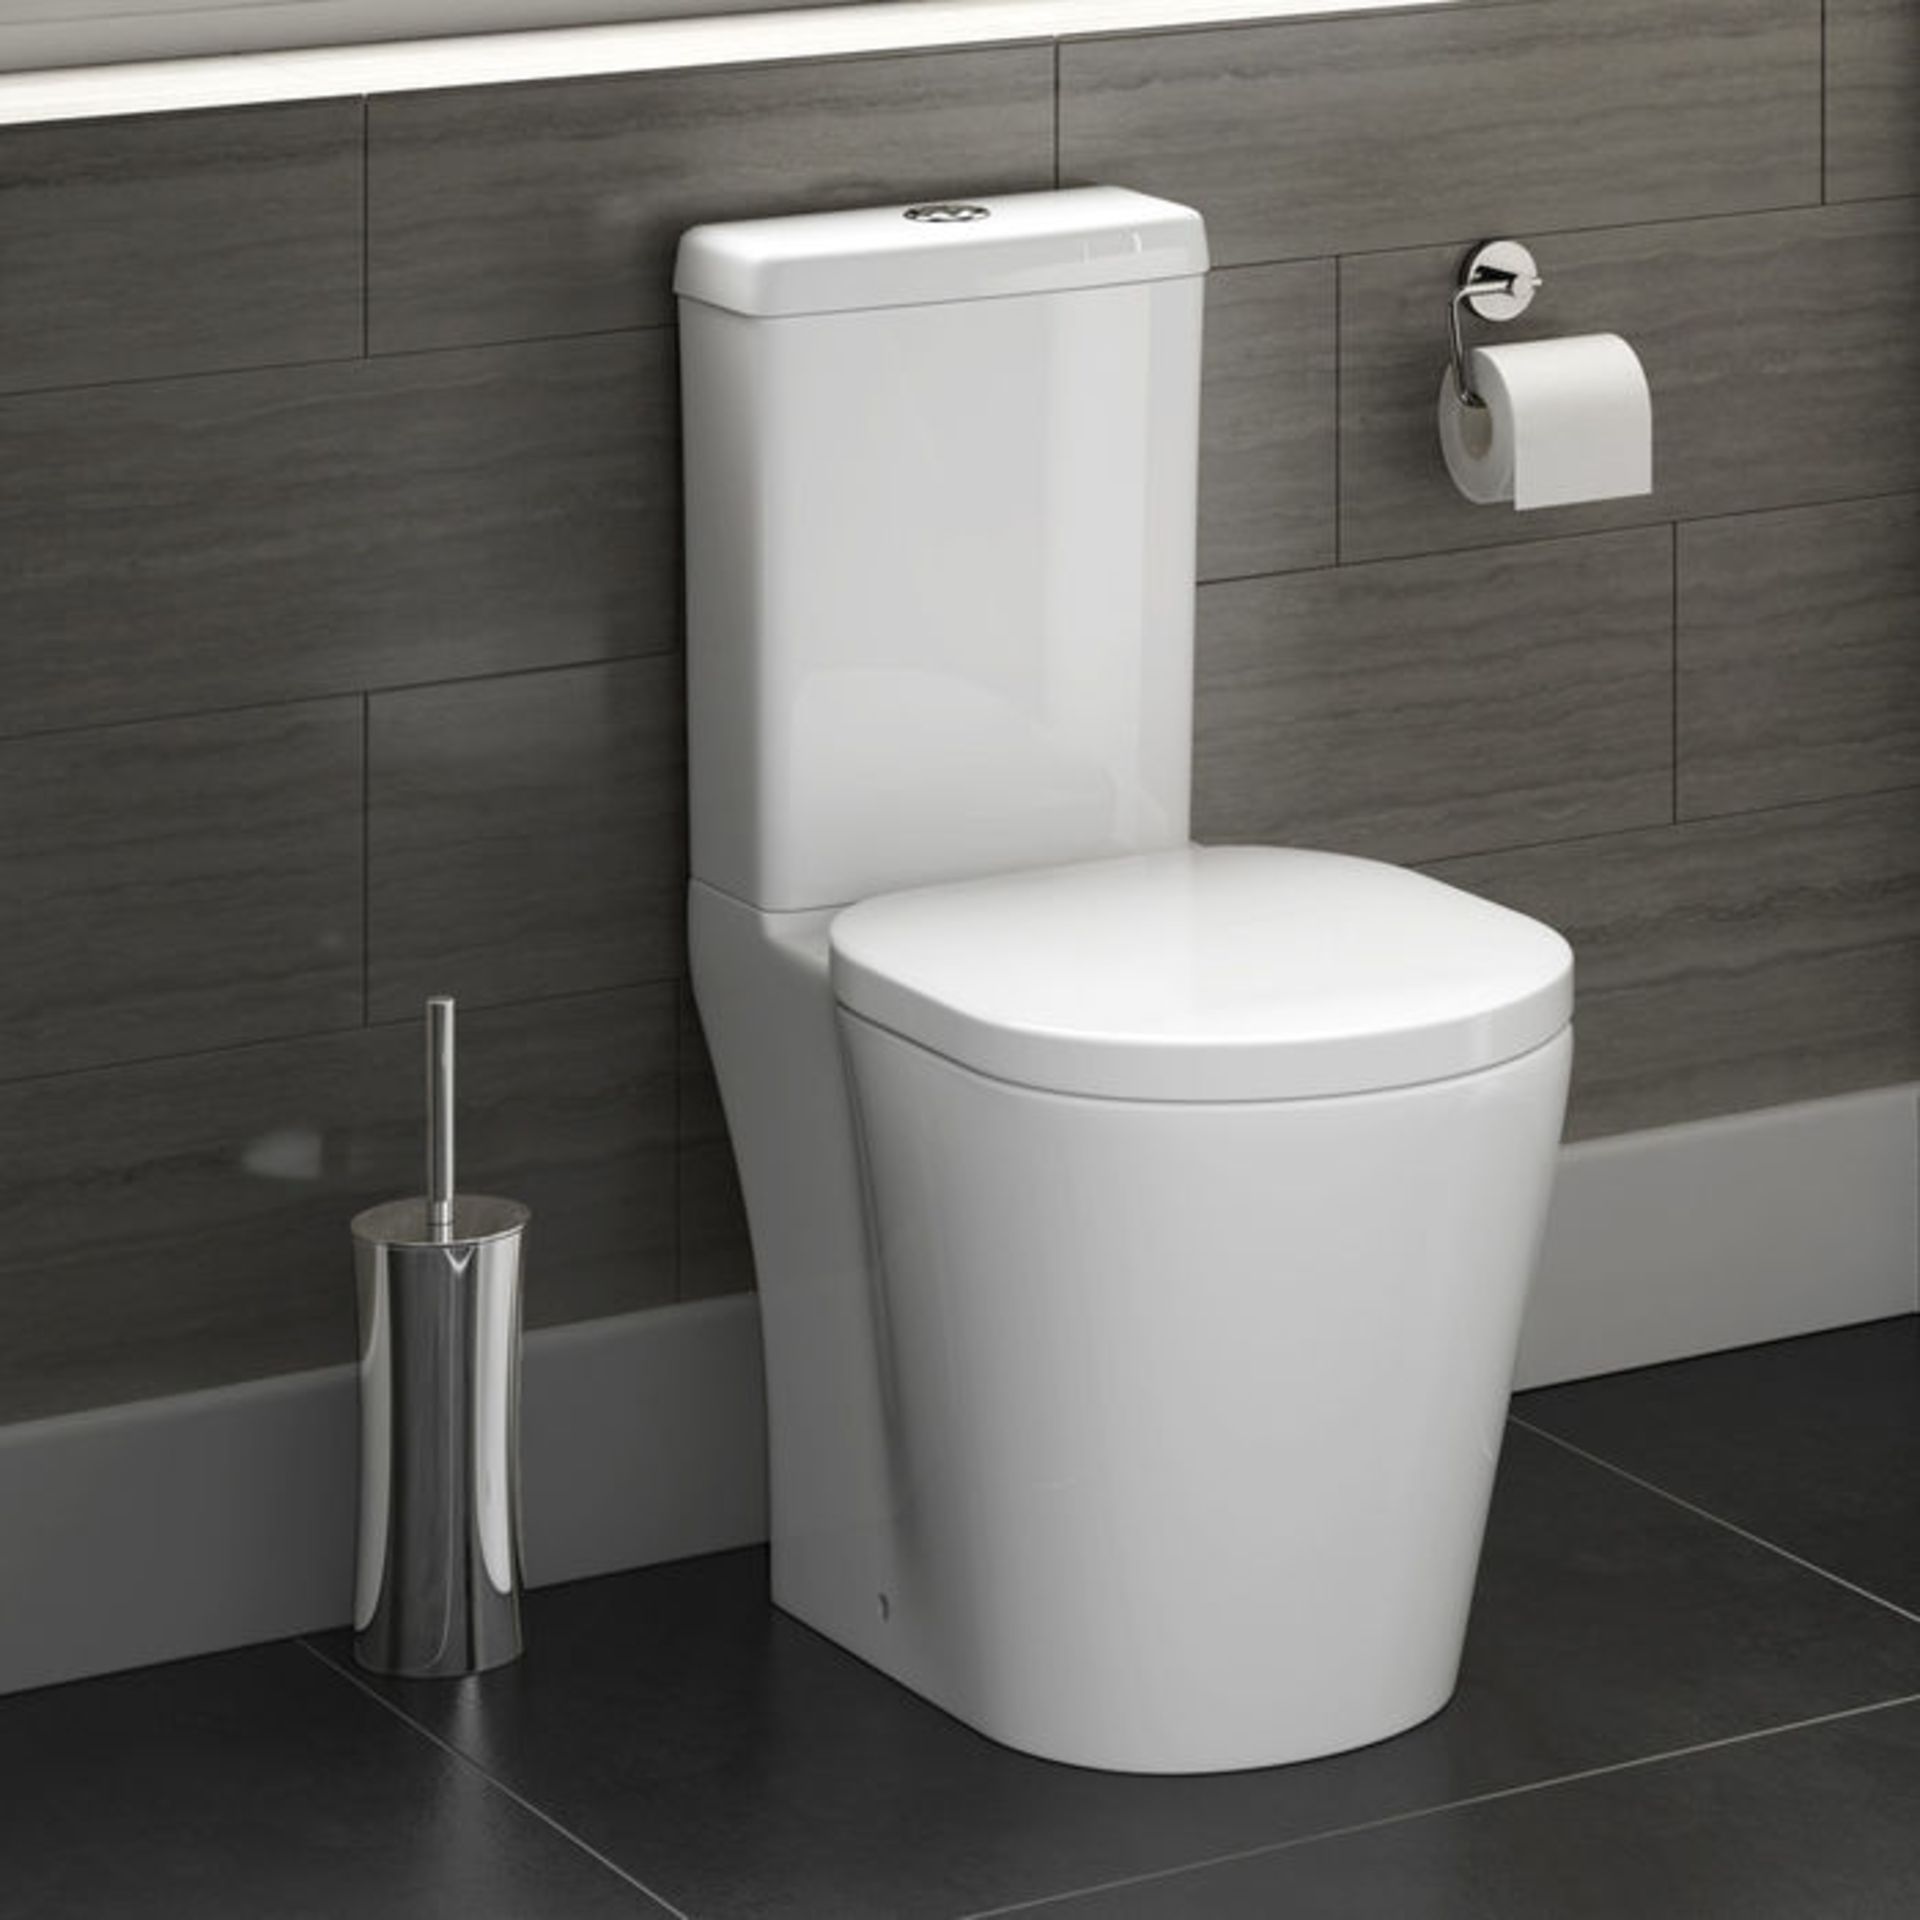 (MT54) Albi Close Coupled Toilet & Cistern inc Soft Close Seat This innovative toilet is the